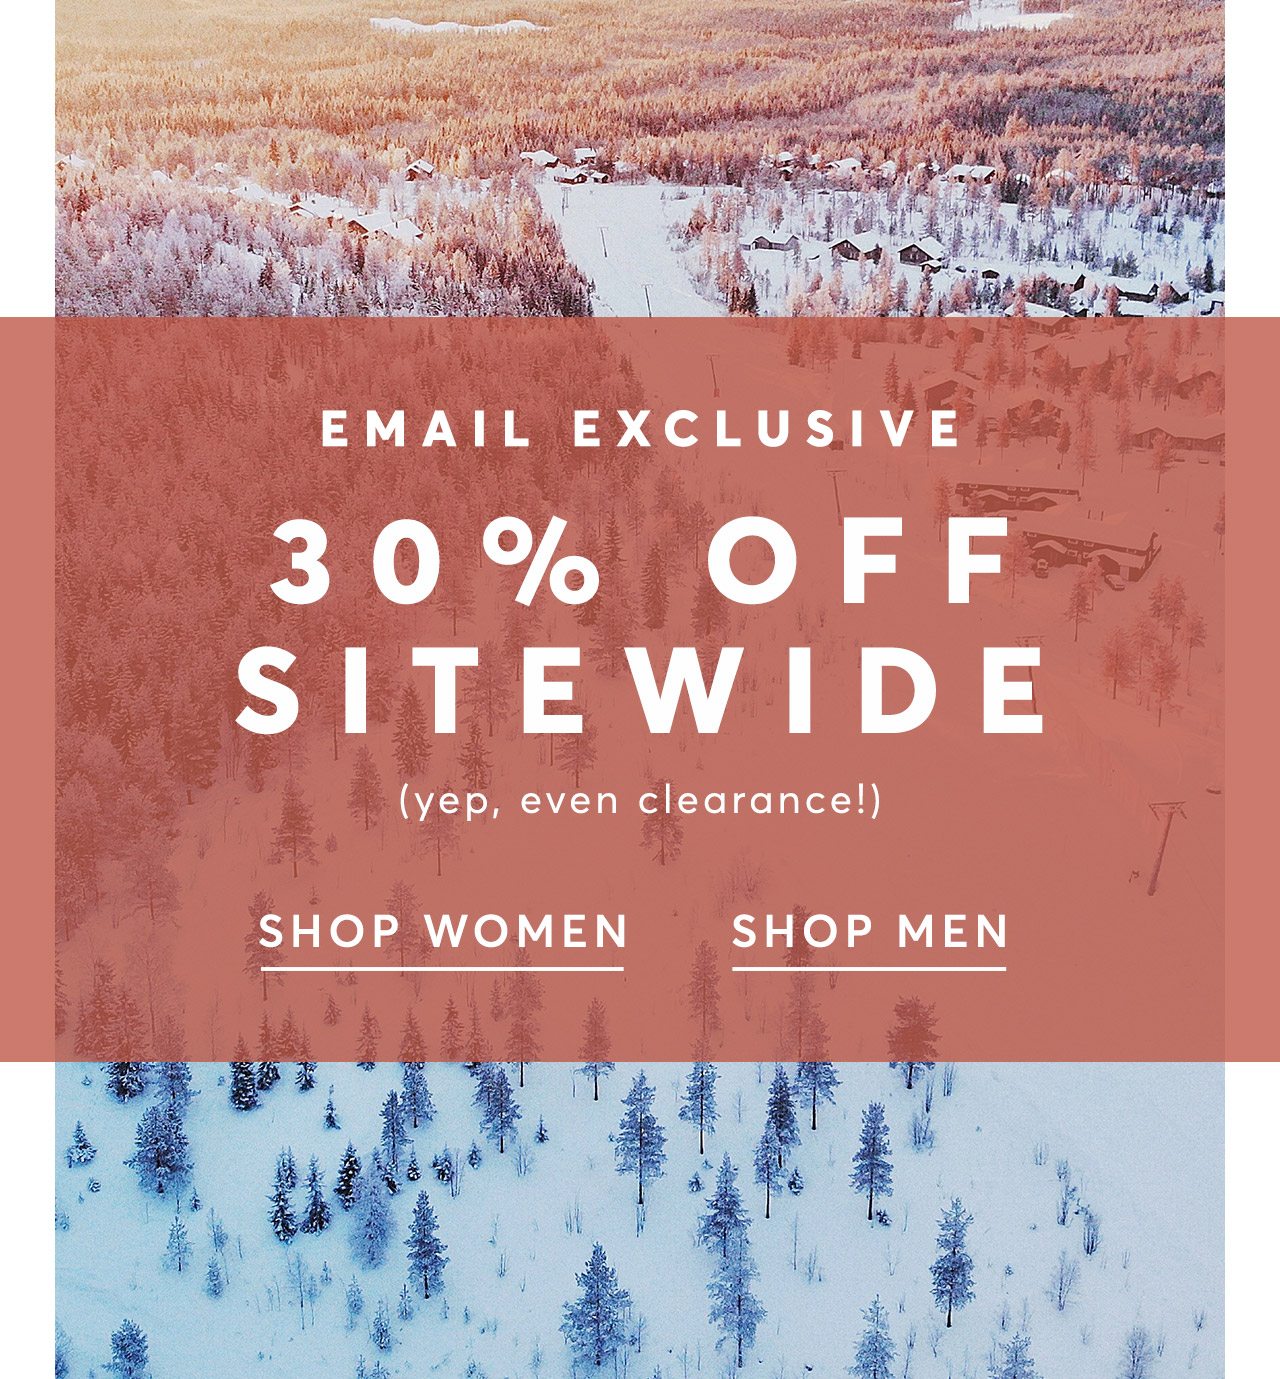 Email Exclusive: 30% Off Sitewide (yep, even clearance!) Shop Women/Shop Men